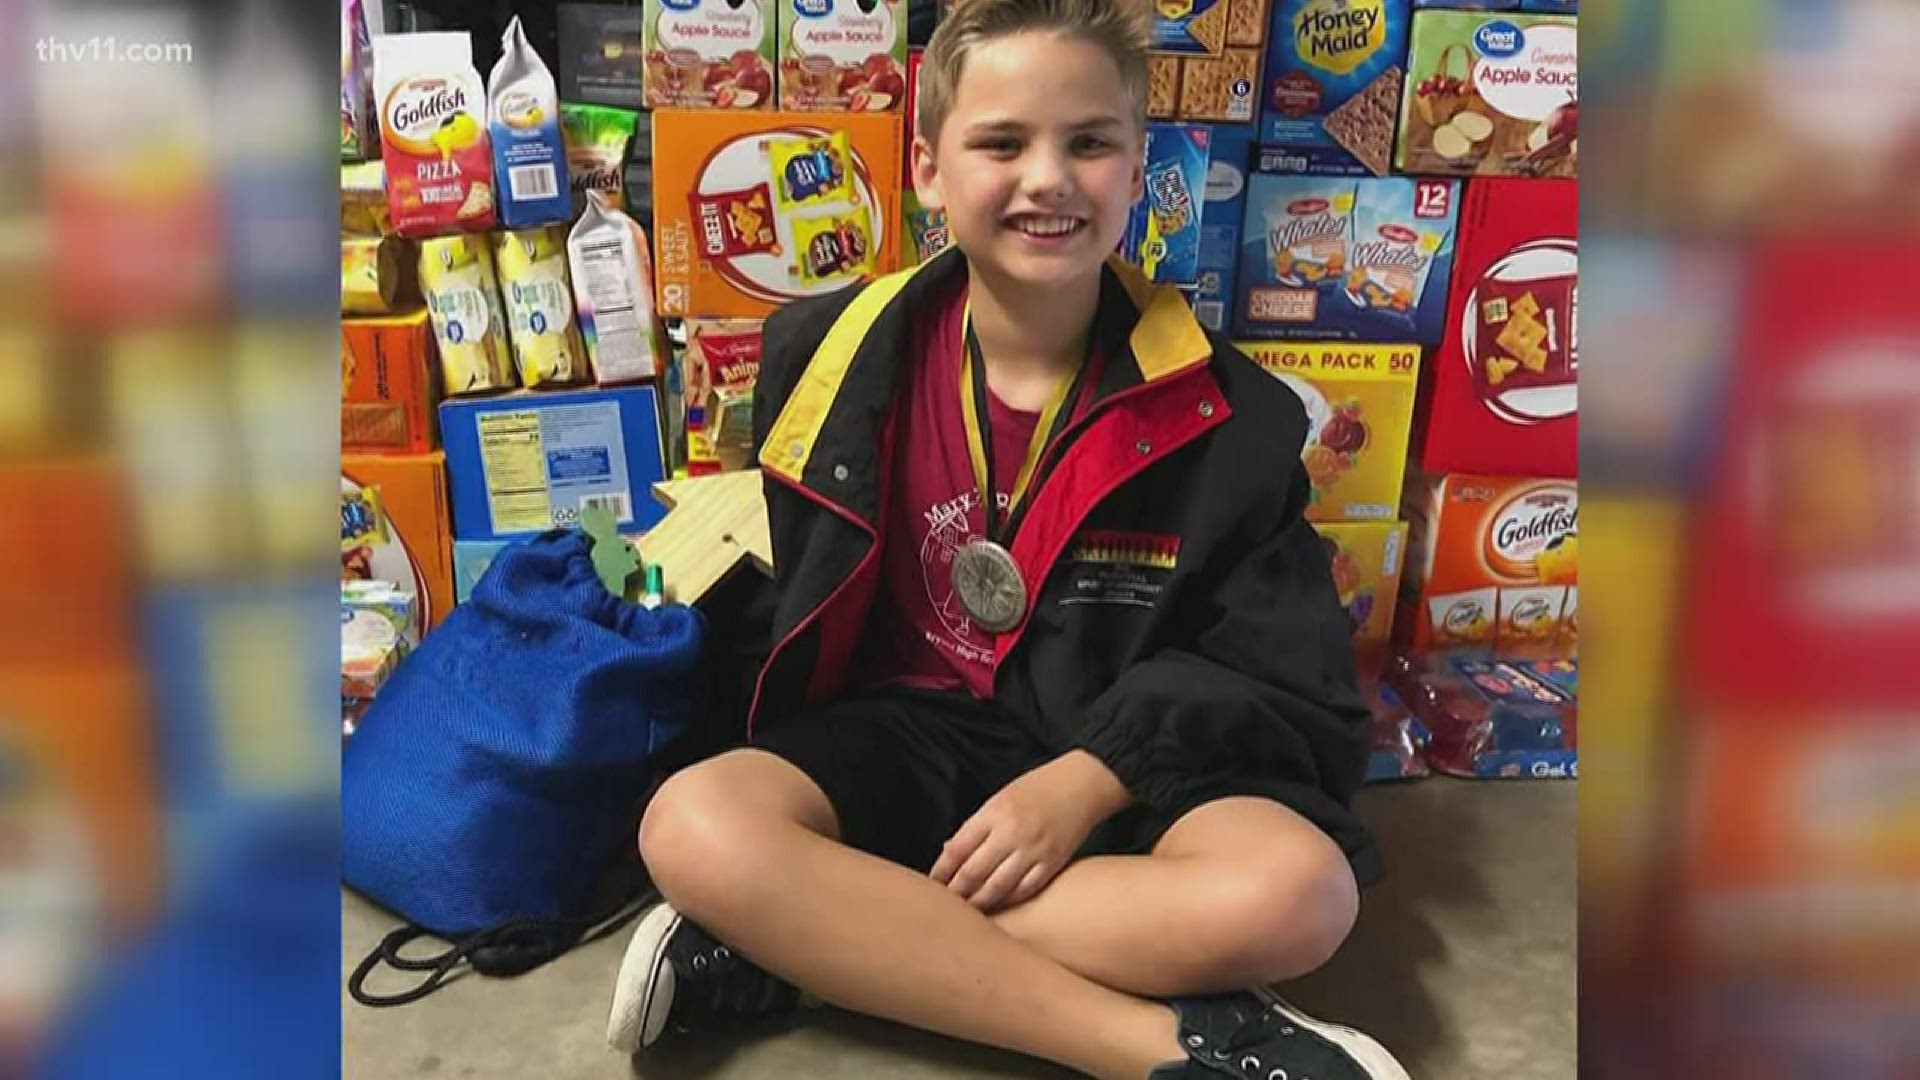 A 12-year-old boy in Saline County is on a mission to serve his community. And he's doing it in a big way, by stuffing bags for foster kids.